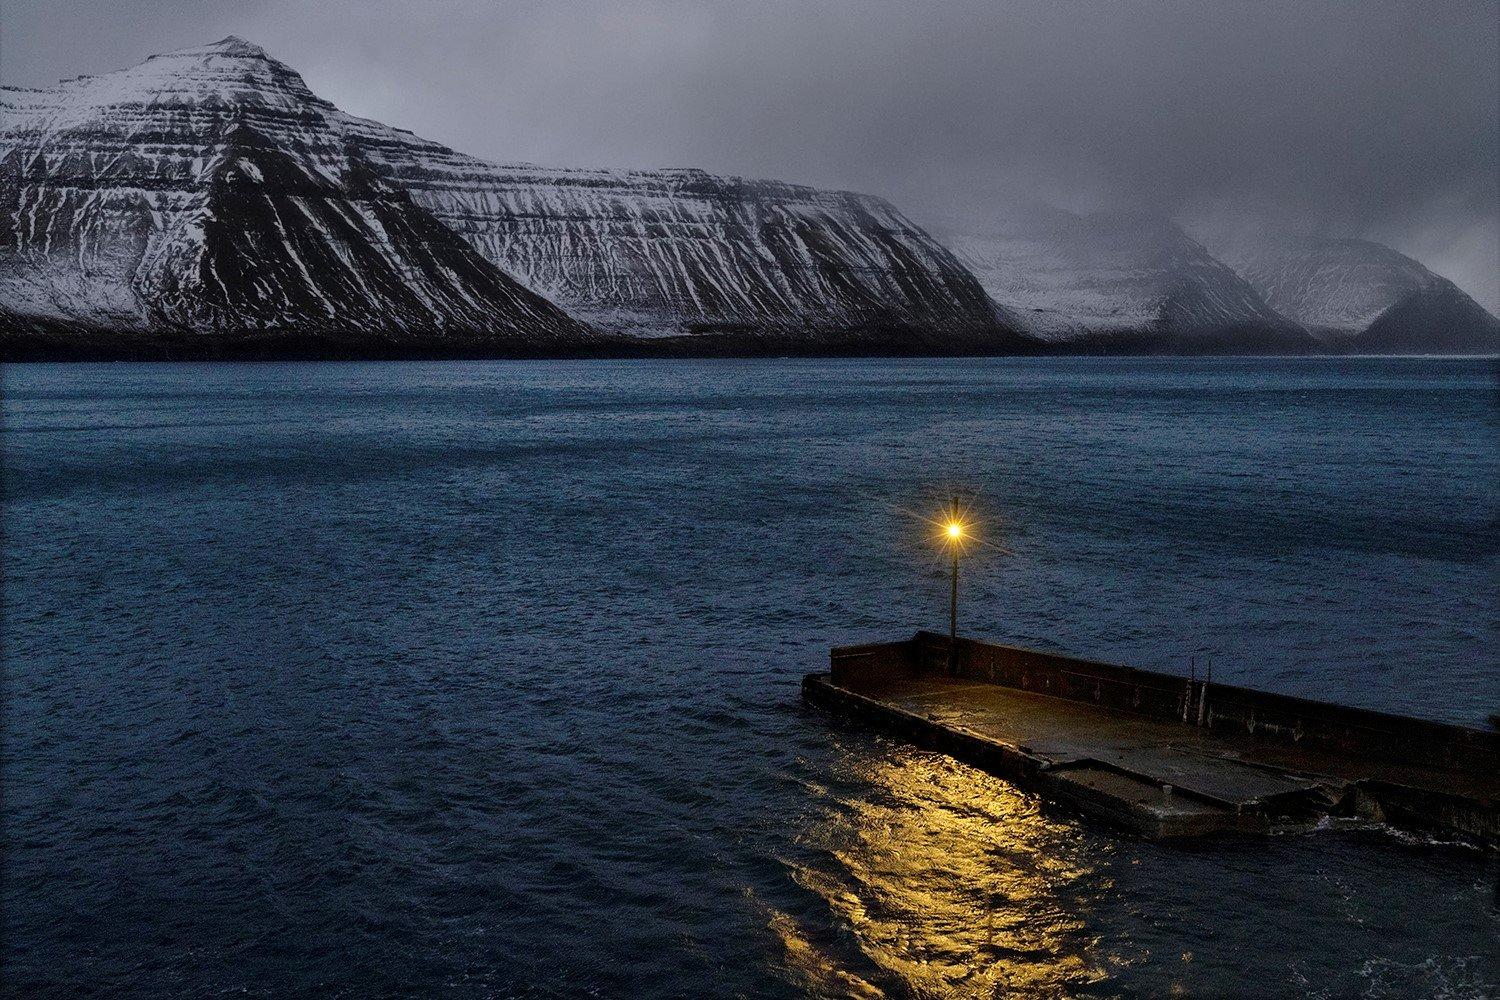 Lost Light is a limited-edition photograph by French contemporary artist Christophe Jacrot. It is a part of the “Turbulent Faroe islands” series.

This photograph is sold unframed as a print only. It is available in 2 dimensions:
*60 cm × 90 cm